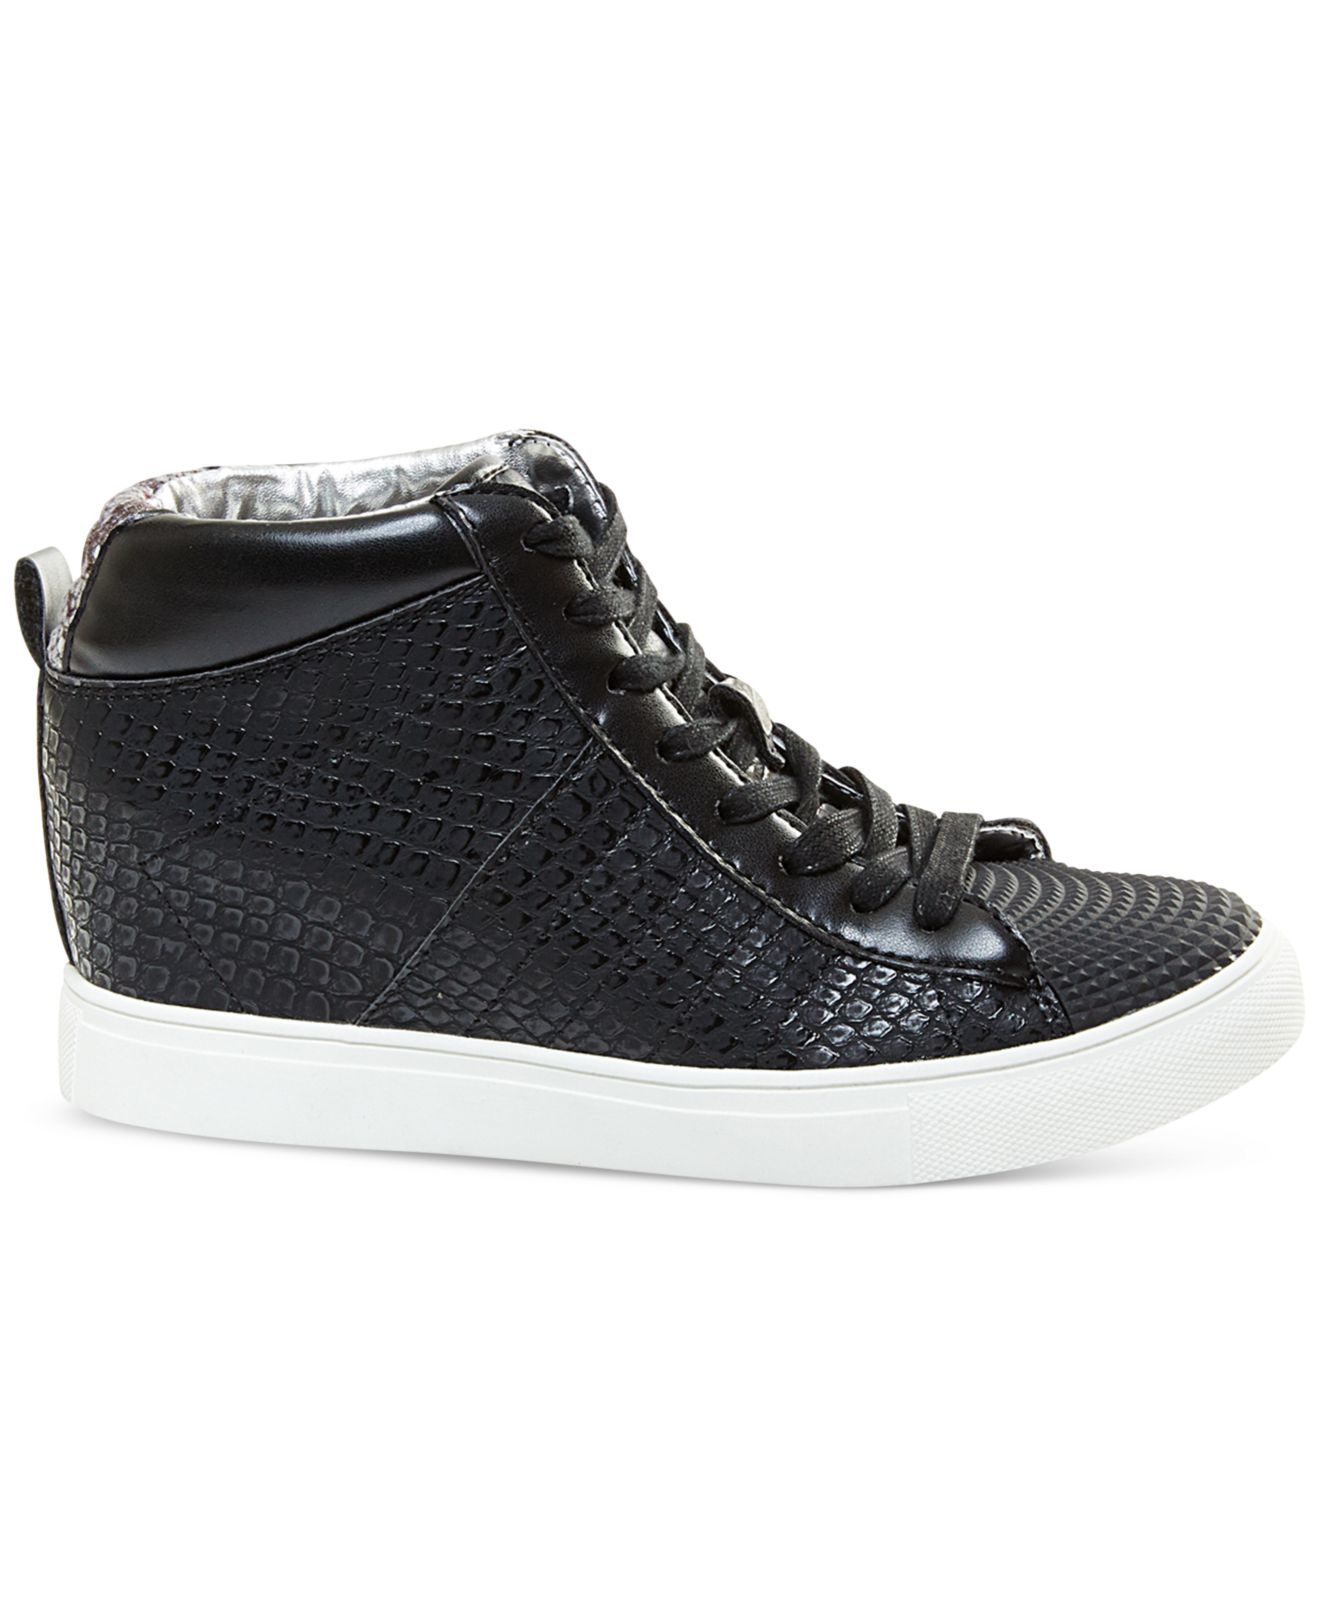 Madden Girl Superstud Lace-up Wedge High-top Sneakers in Black - Lyst